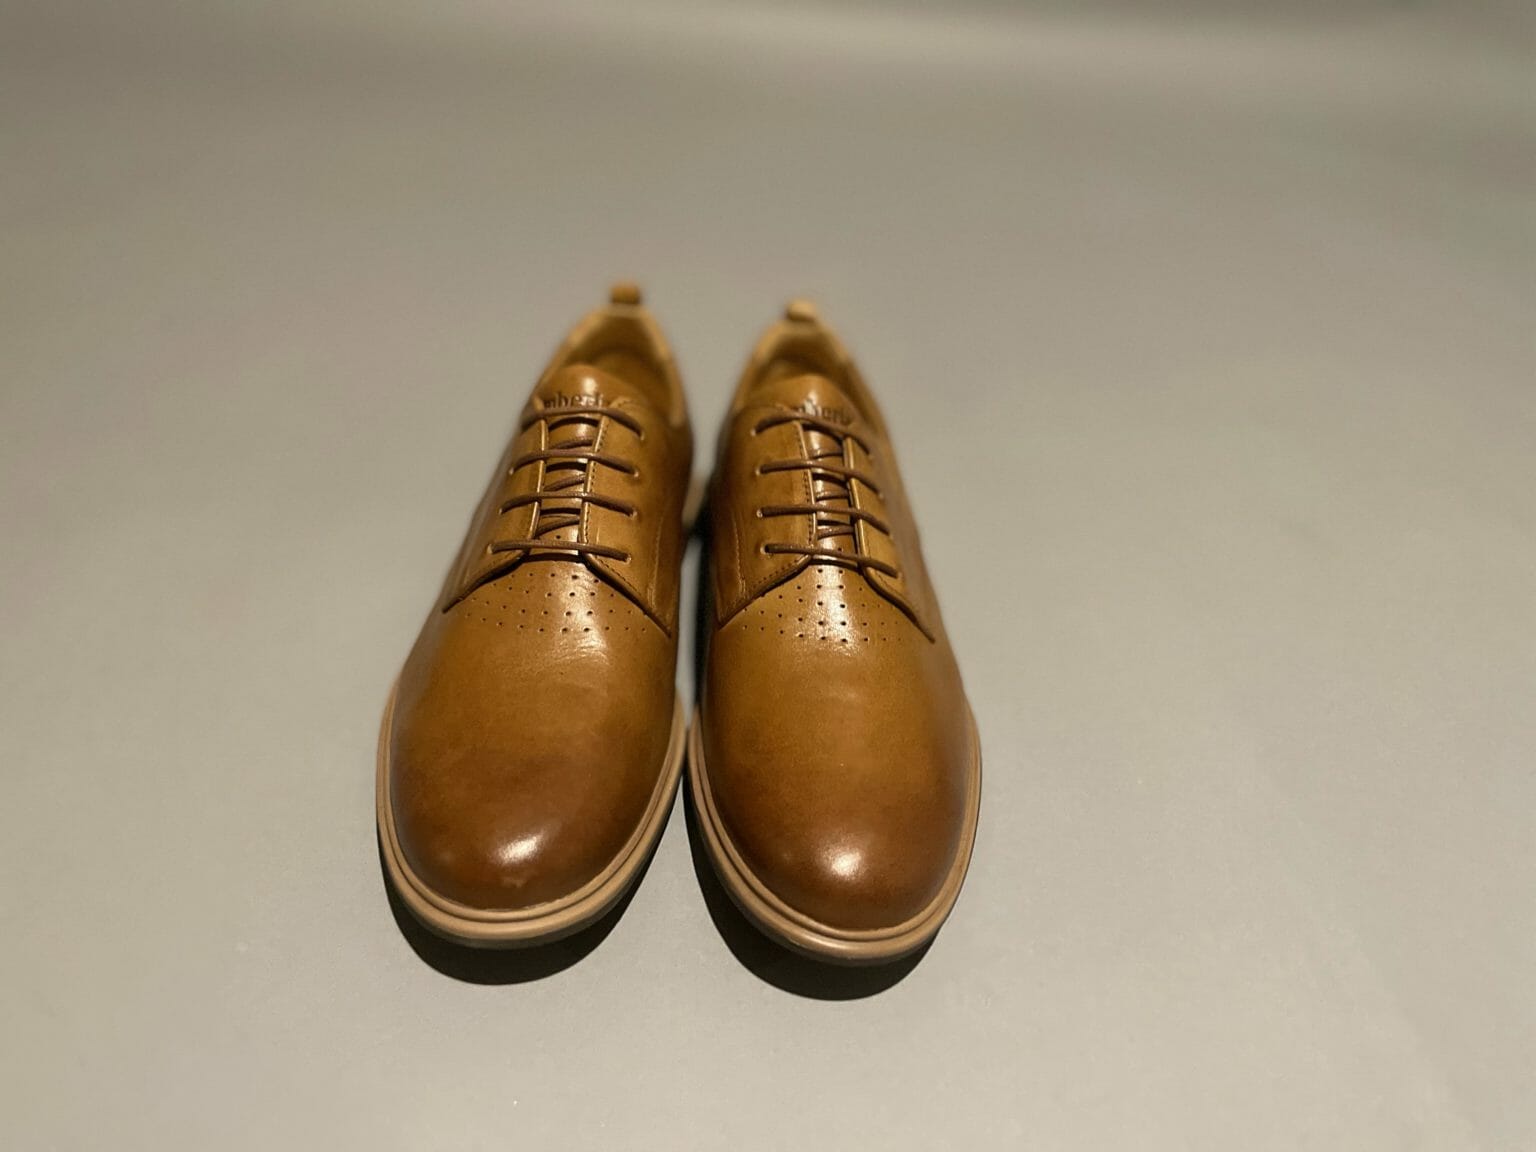 Amberjack Shoe Review The Best Dress Shoes You'll Ever Own. Period